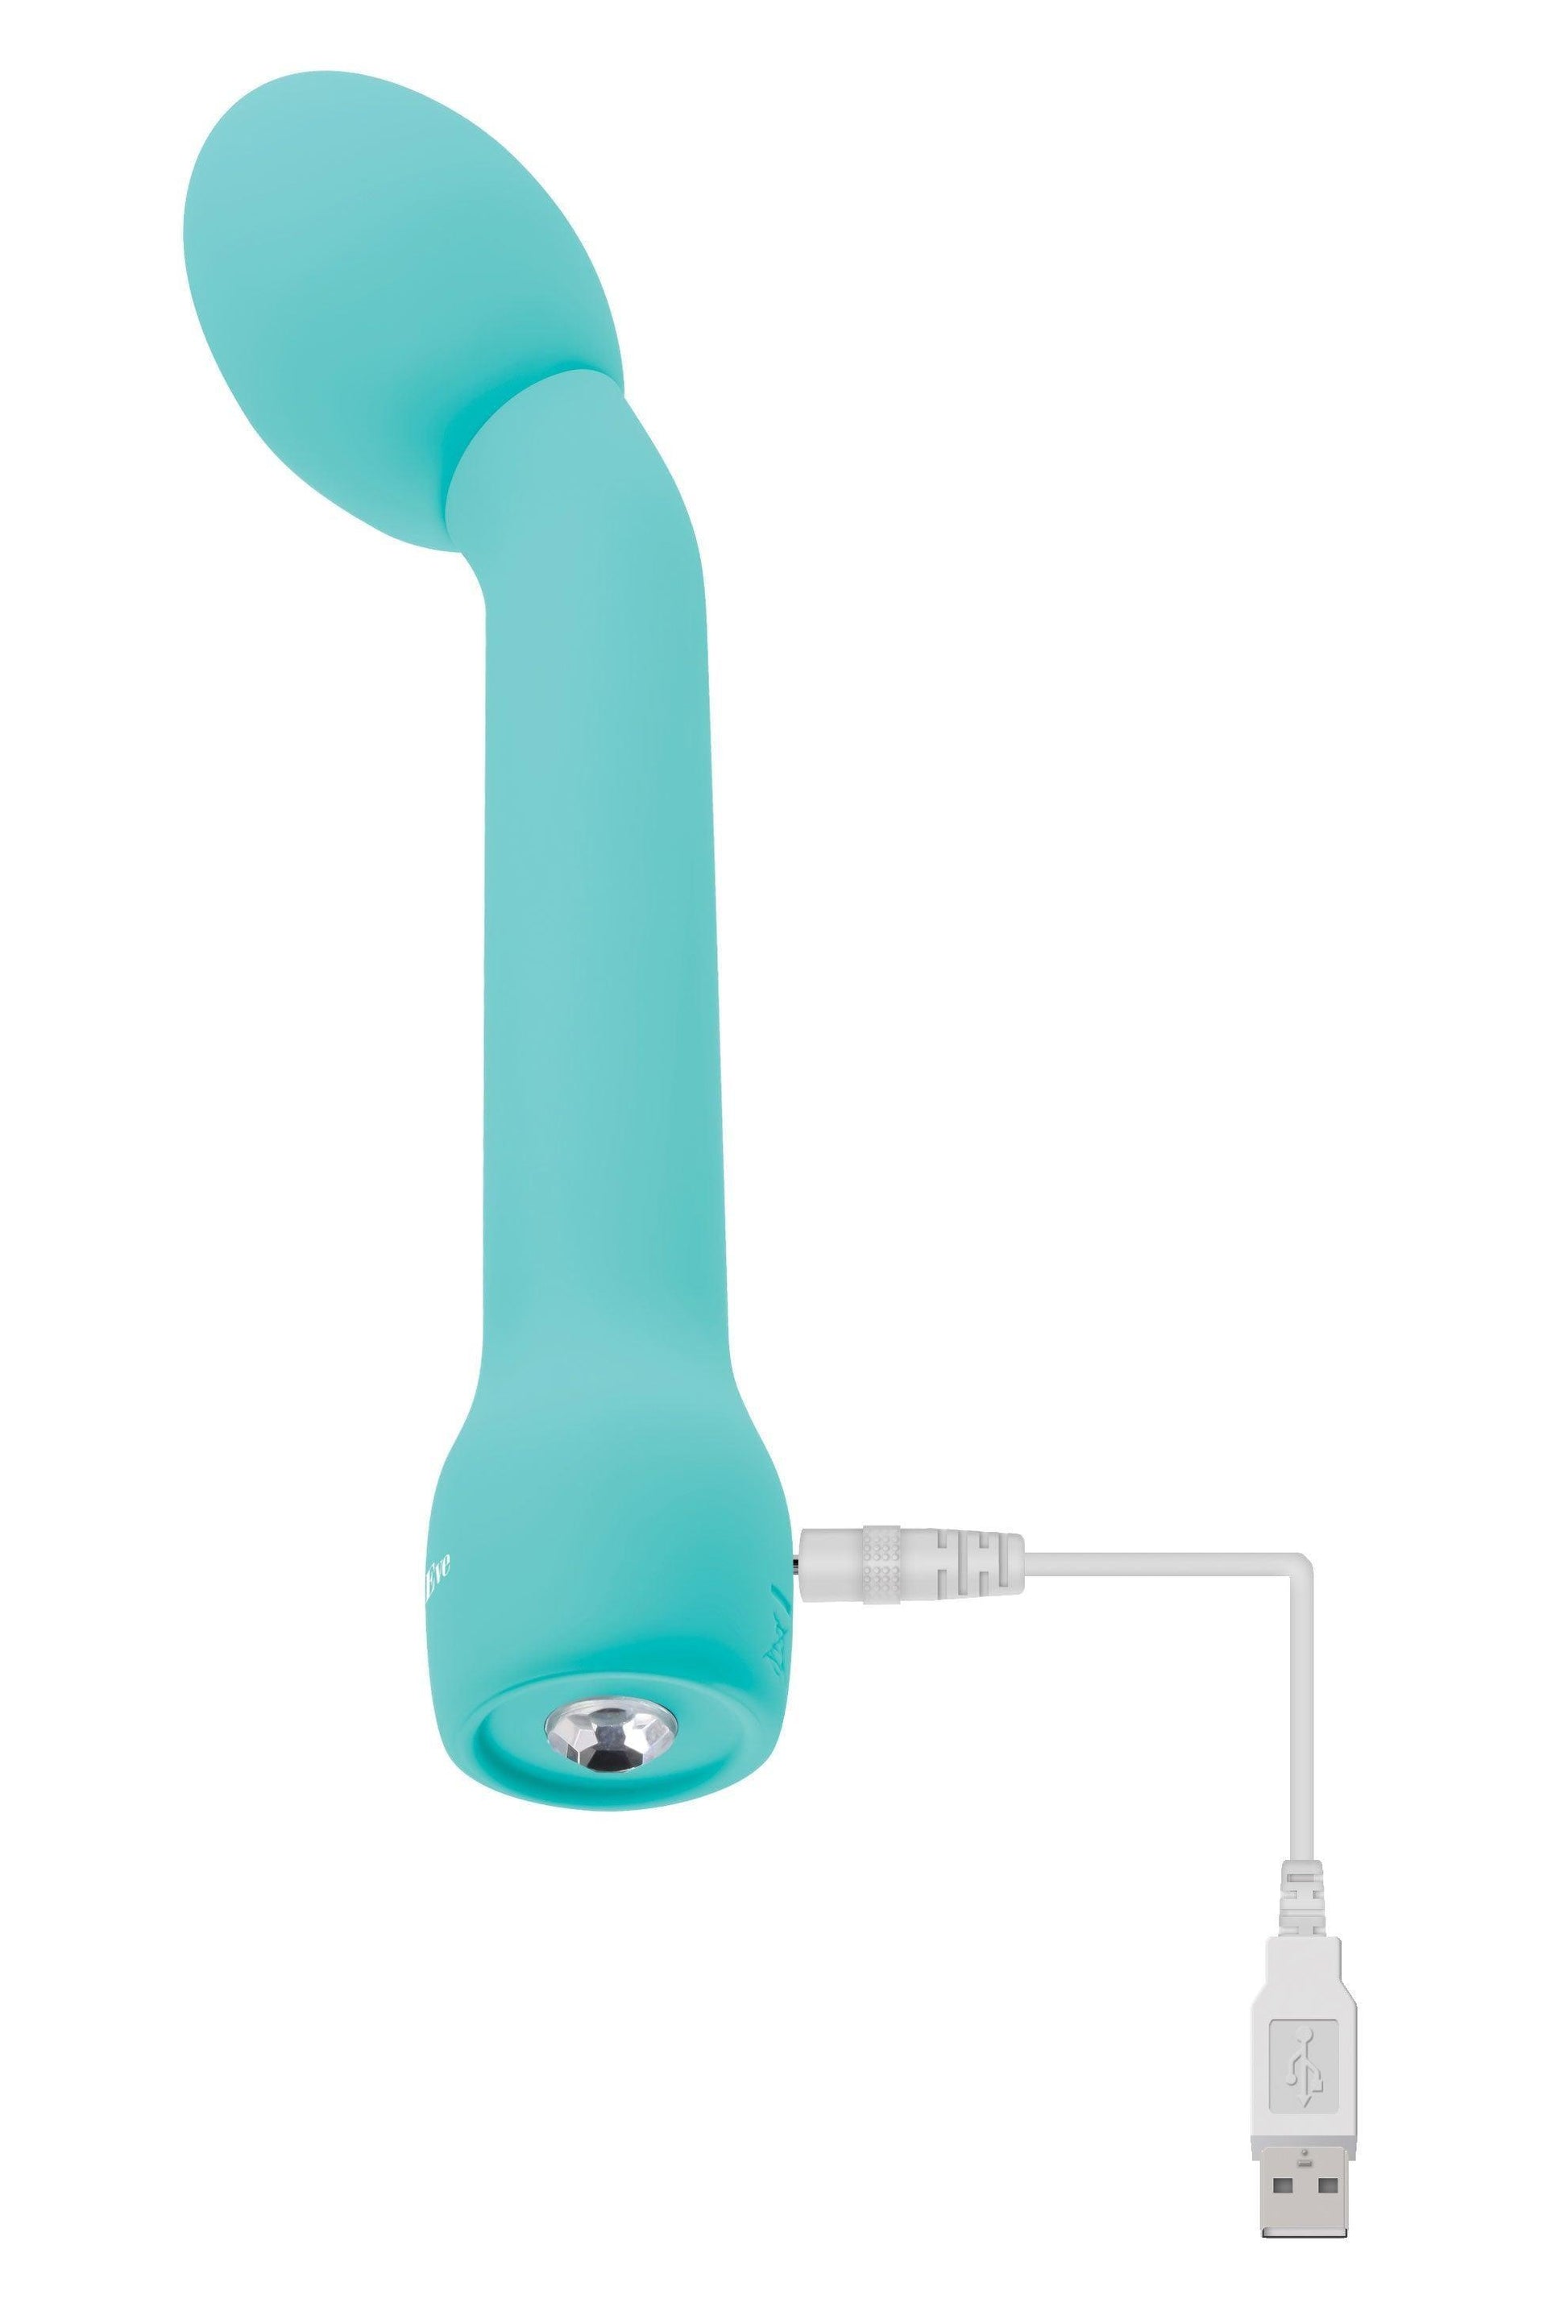 Adam and Eve Rechargeable Silicone G-Gasm Delight - Aqua - My Sex Toy Hub